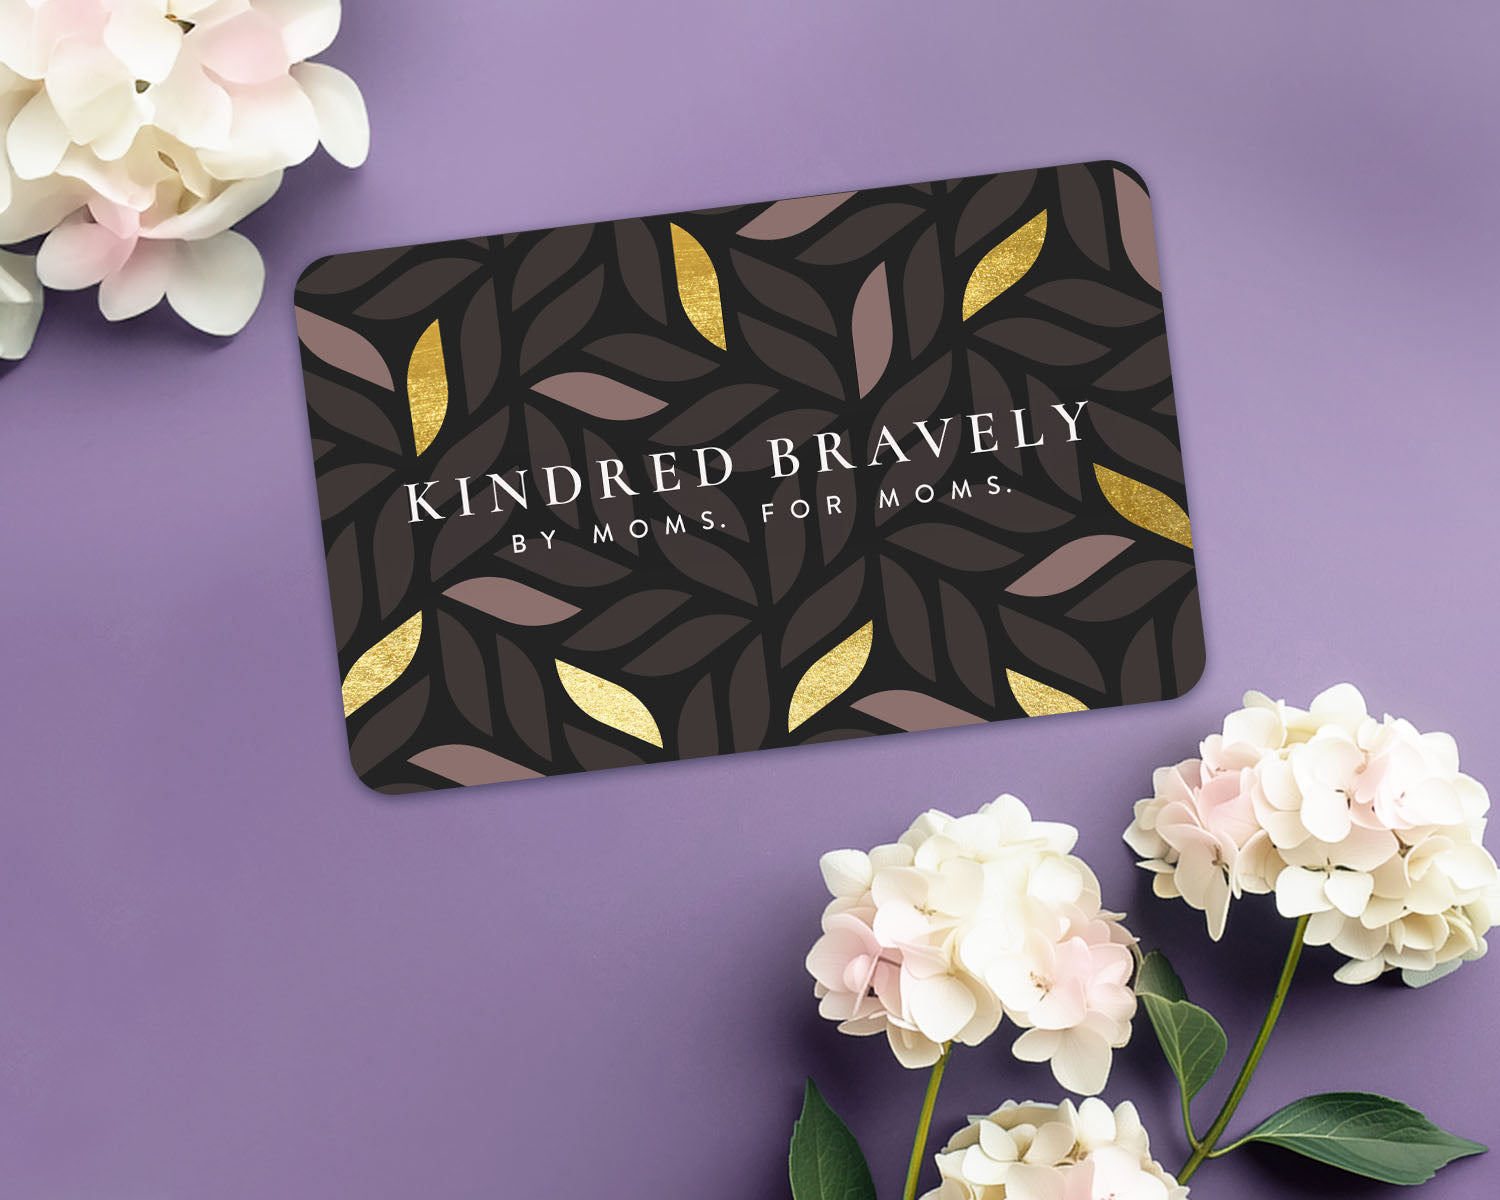 Kindred Bravely gift card with flowers in two corners of the image